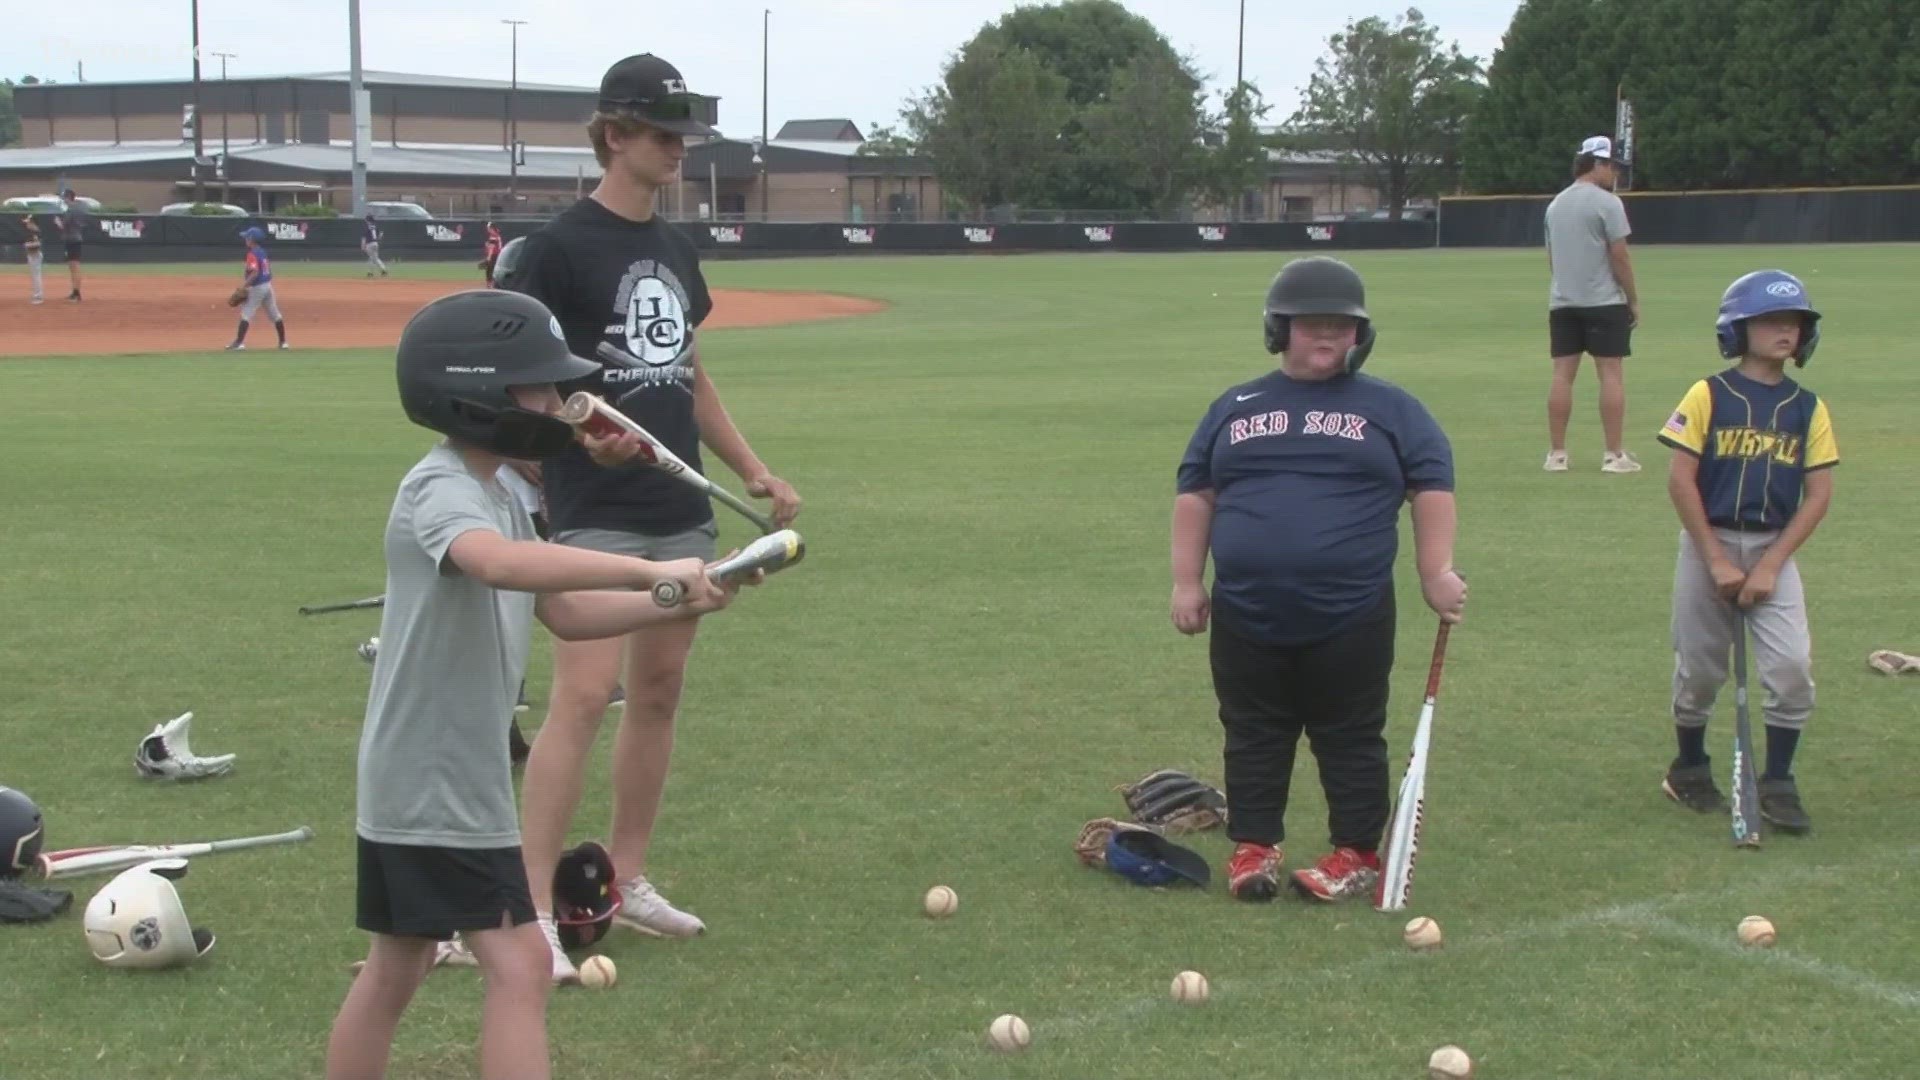 Head Coach Matt Hopkins and the Diamond Bears are hosting their three-day baseball skills camp to more than 50 little leaguers just starting to learn the game